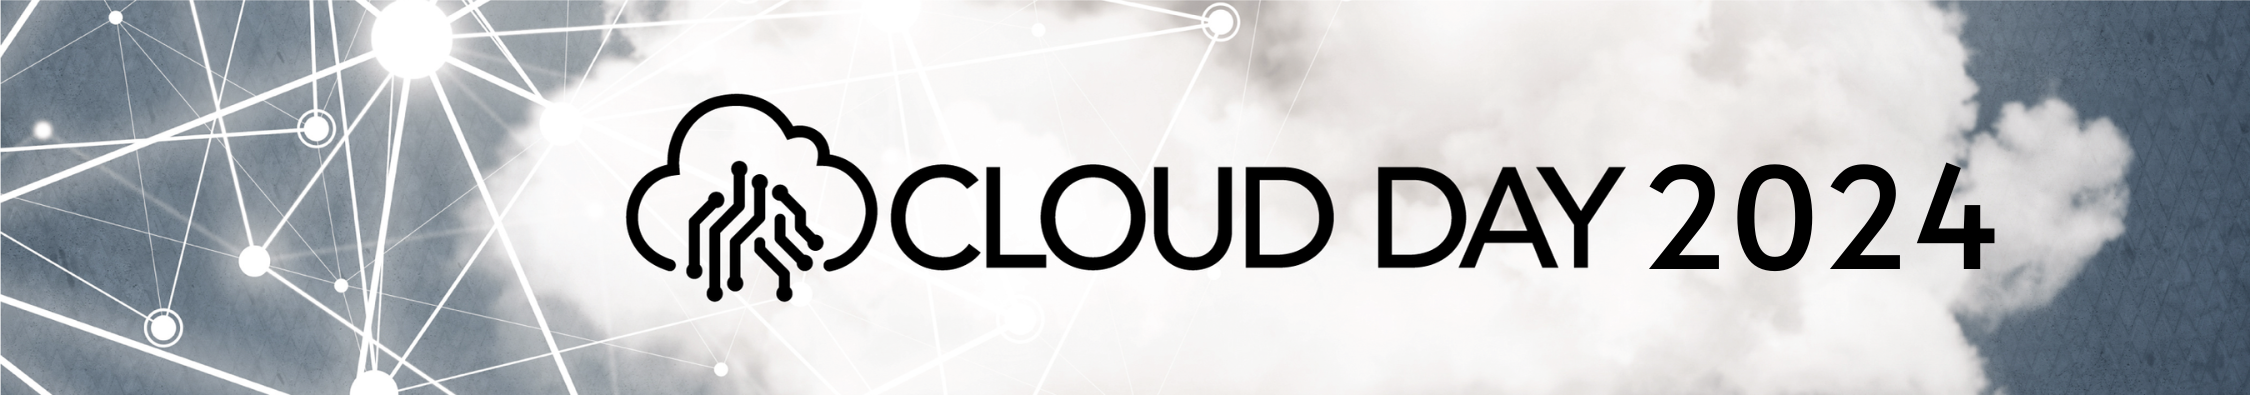 Banner evento Cloud Day 2024